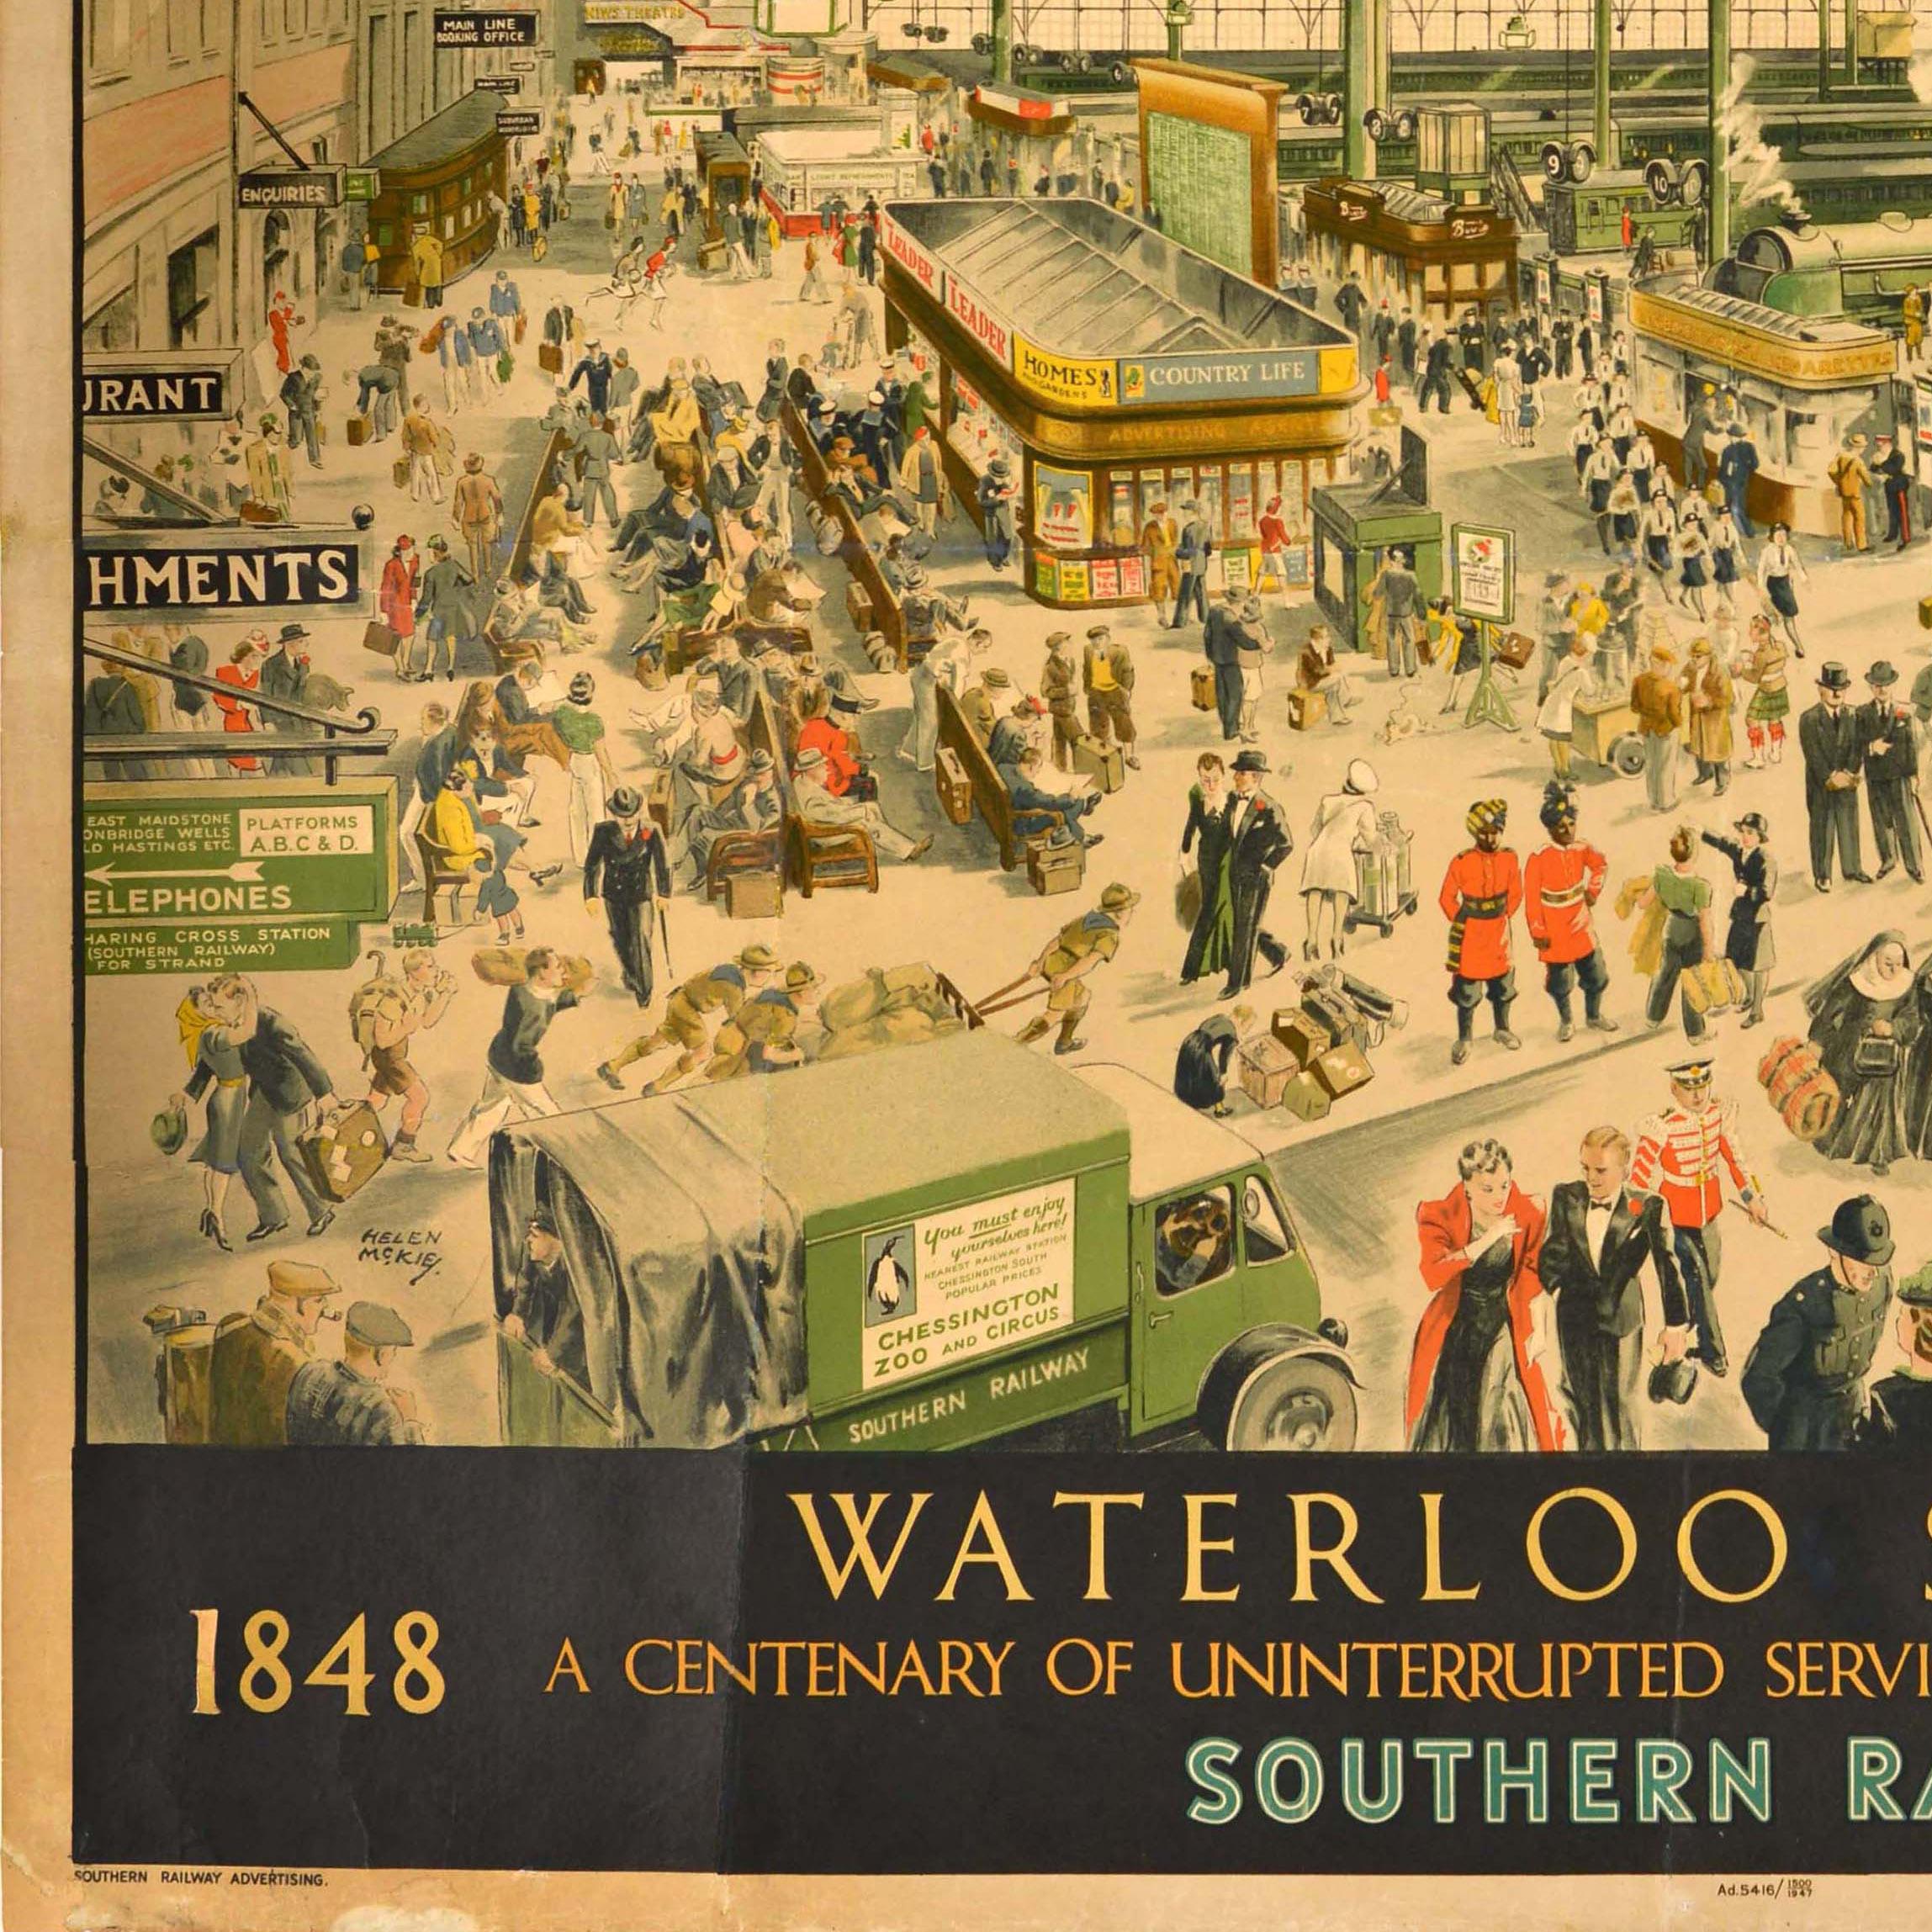 Mid-20th Century Original Vintage Travel Advertising Poster Waterloo Station Southern Railway For Sale